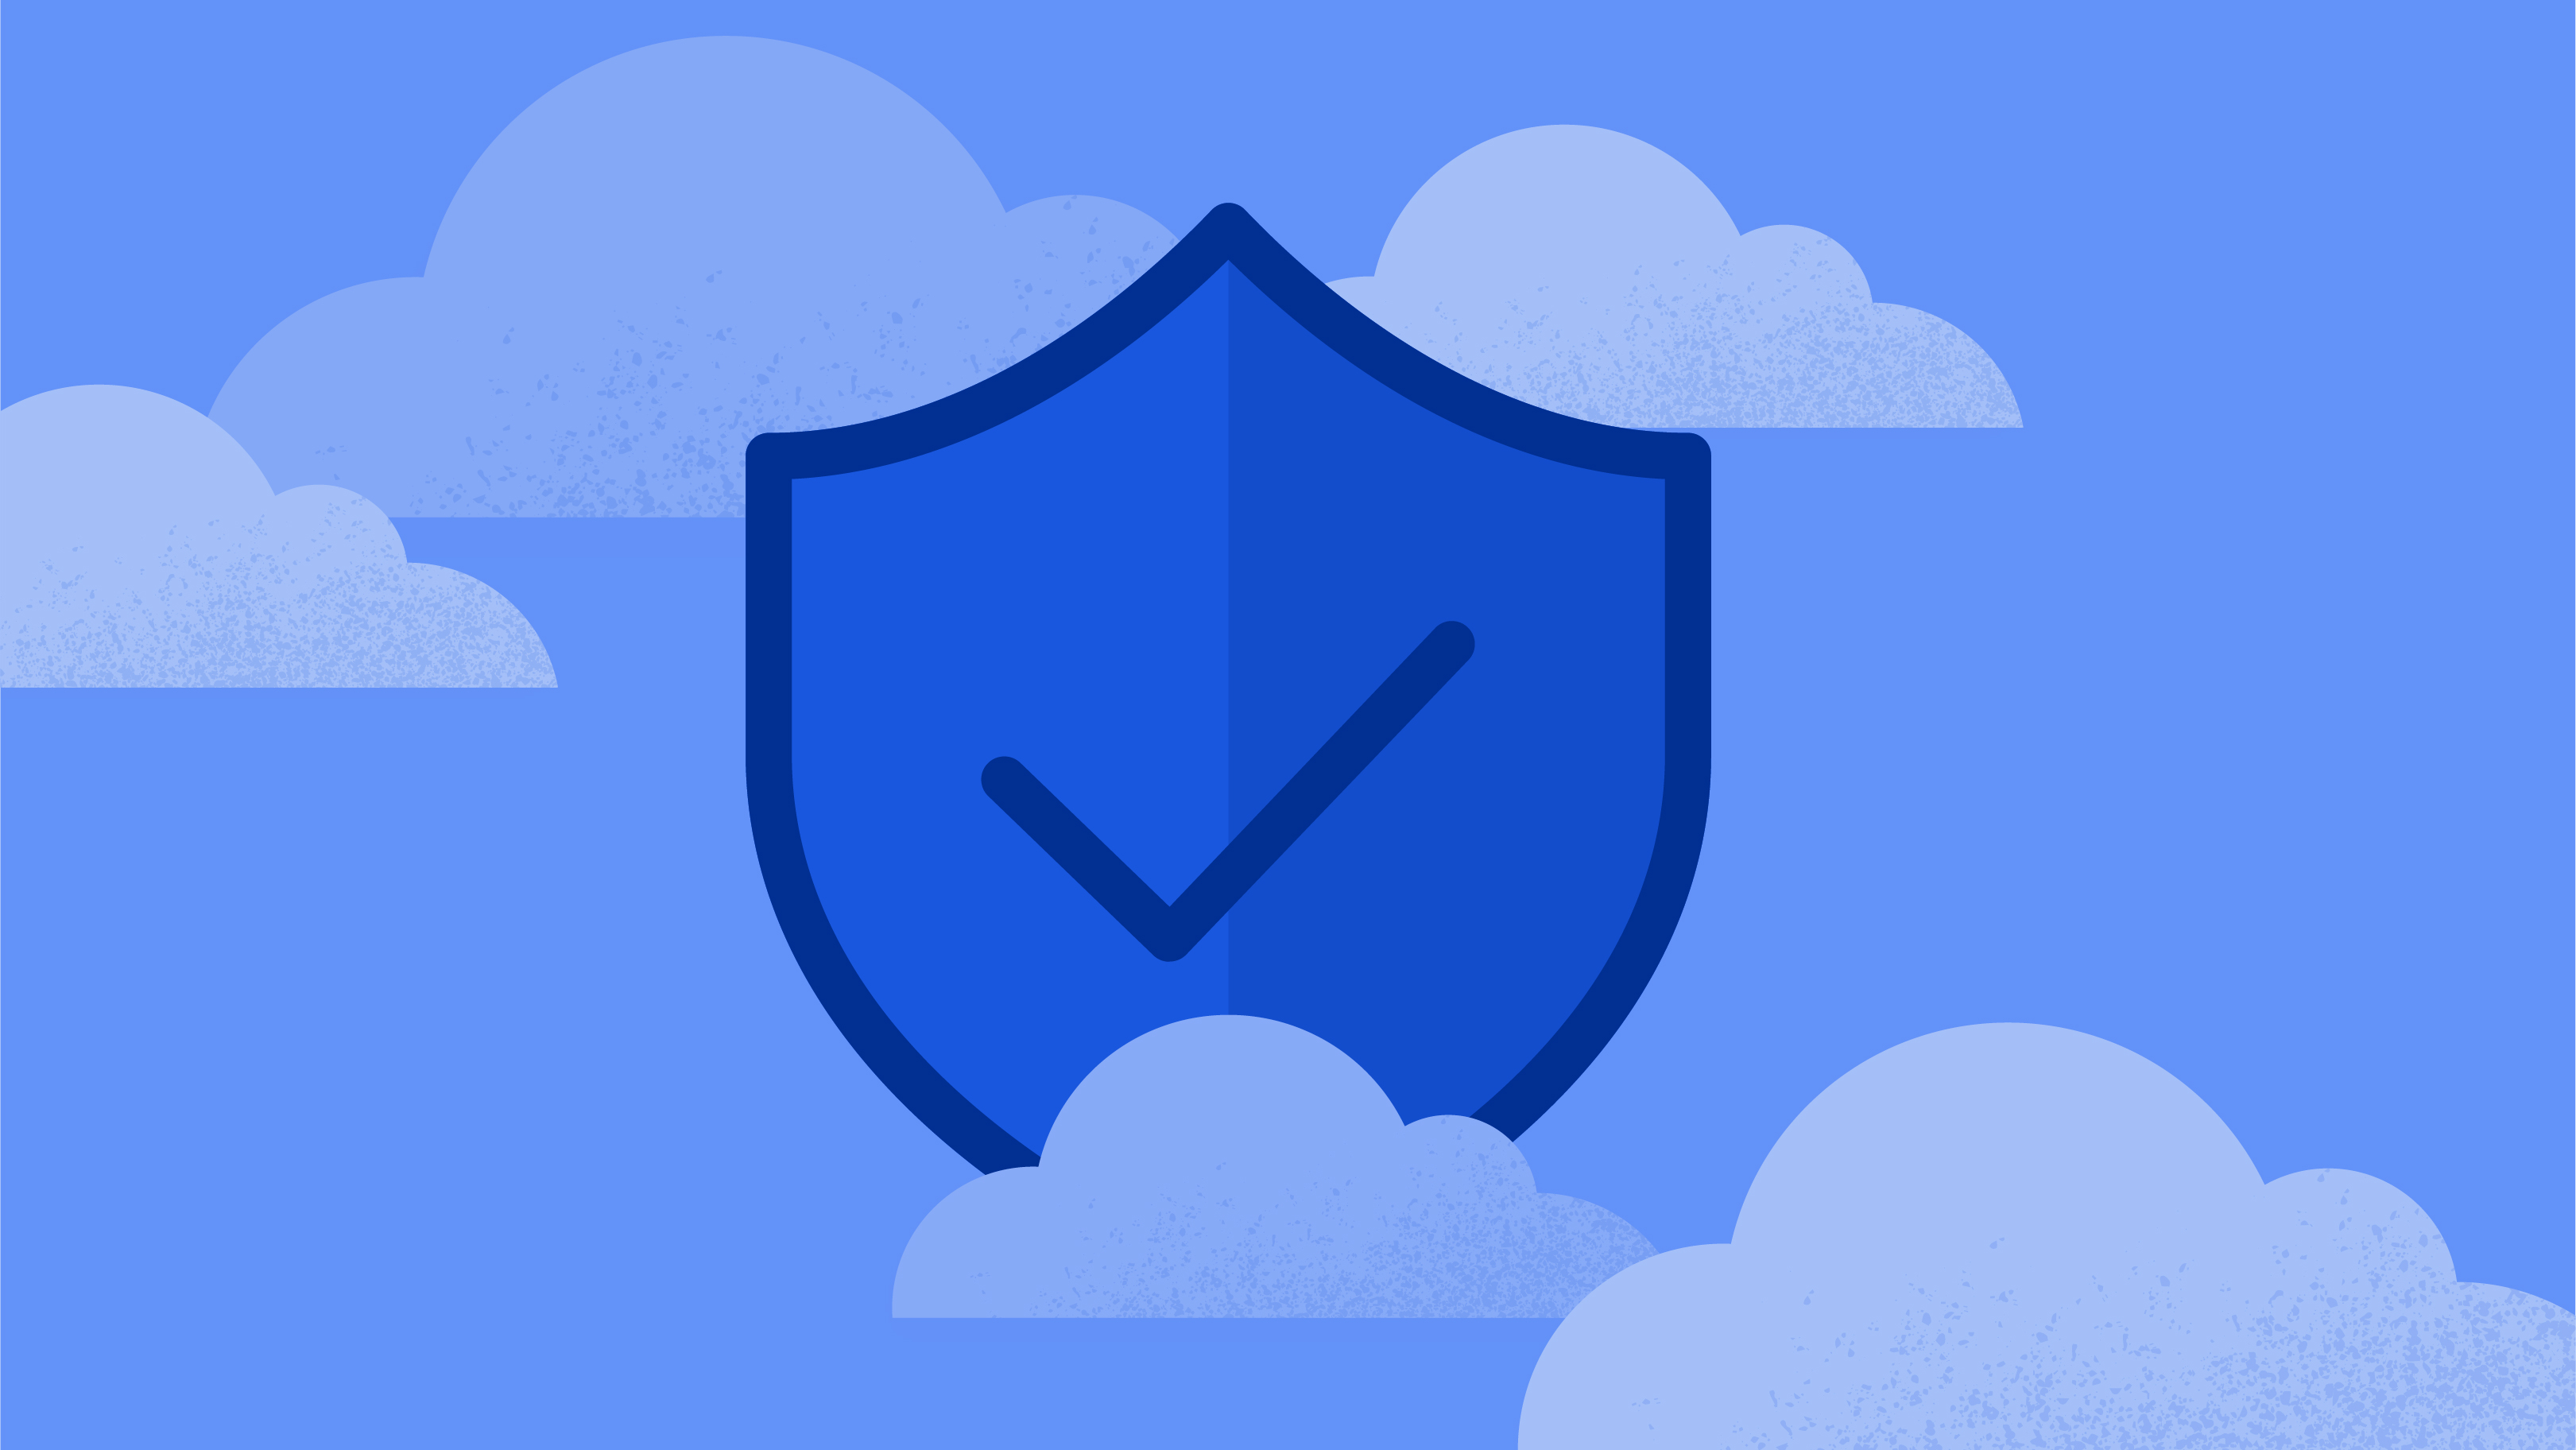 Blue shield with a checkmark surrounded by clouds